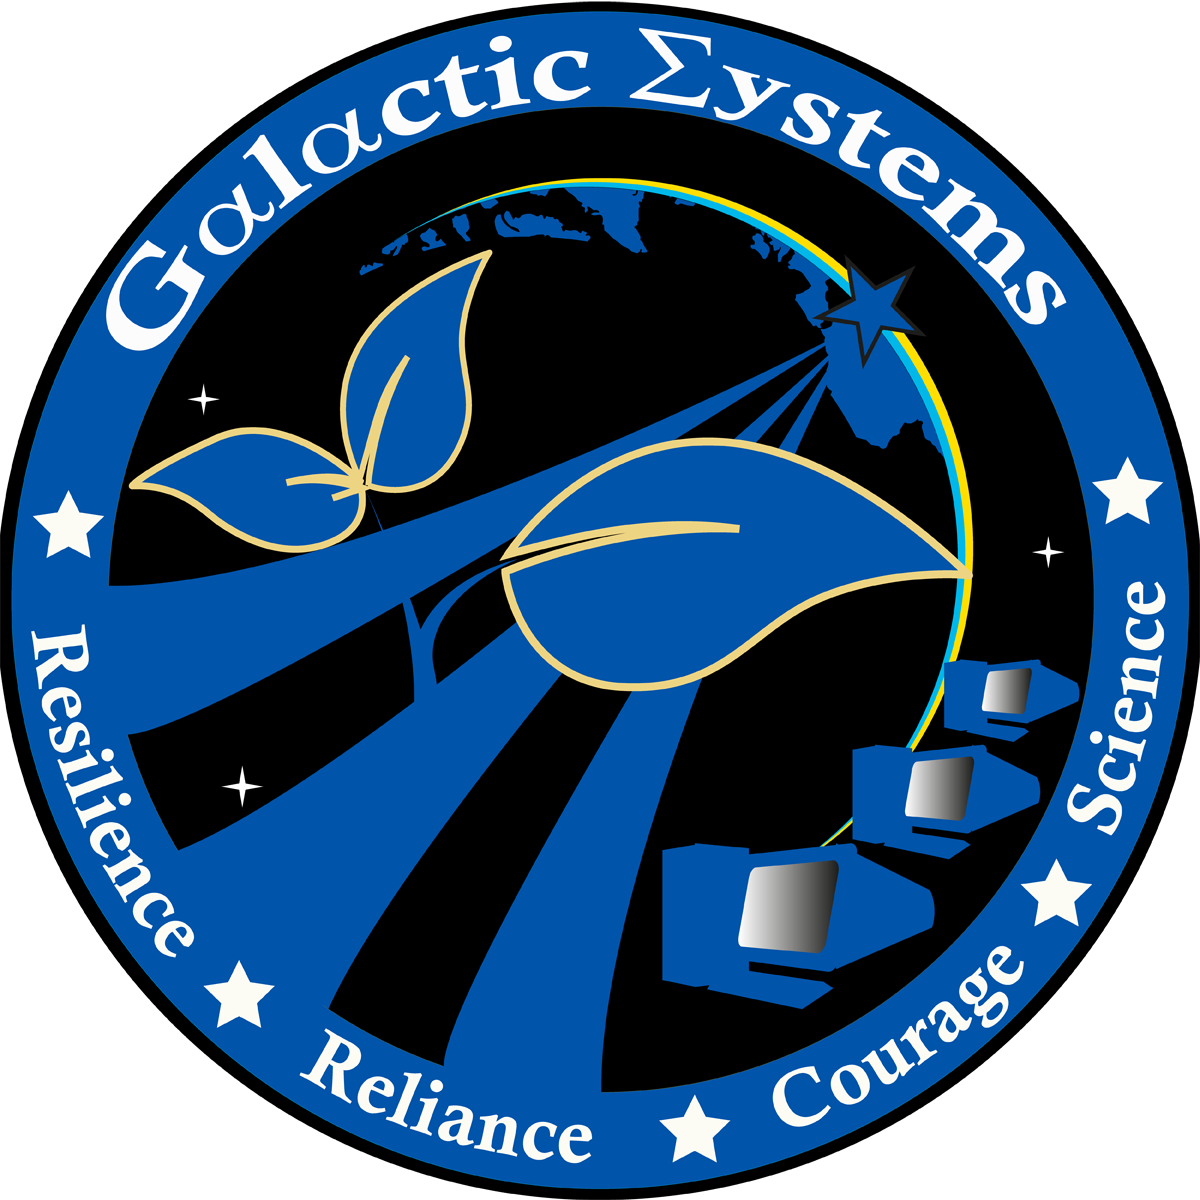 Universe clipart mission to mars. About galactic systems llc